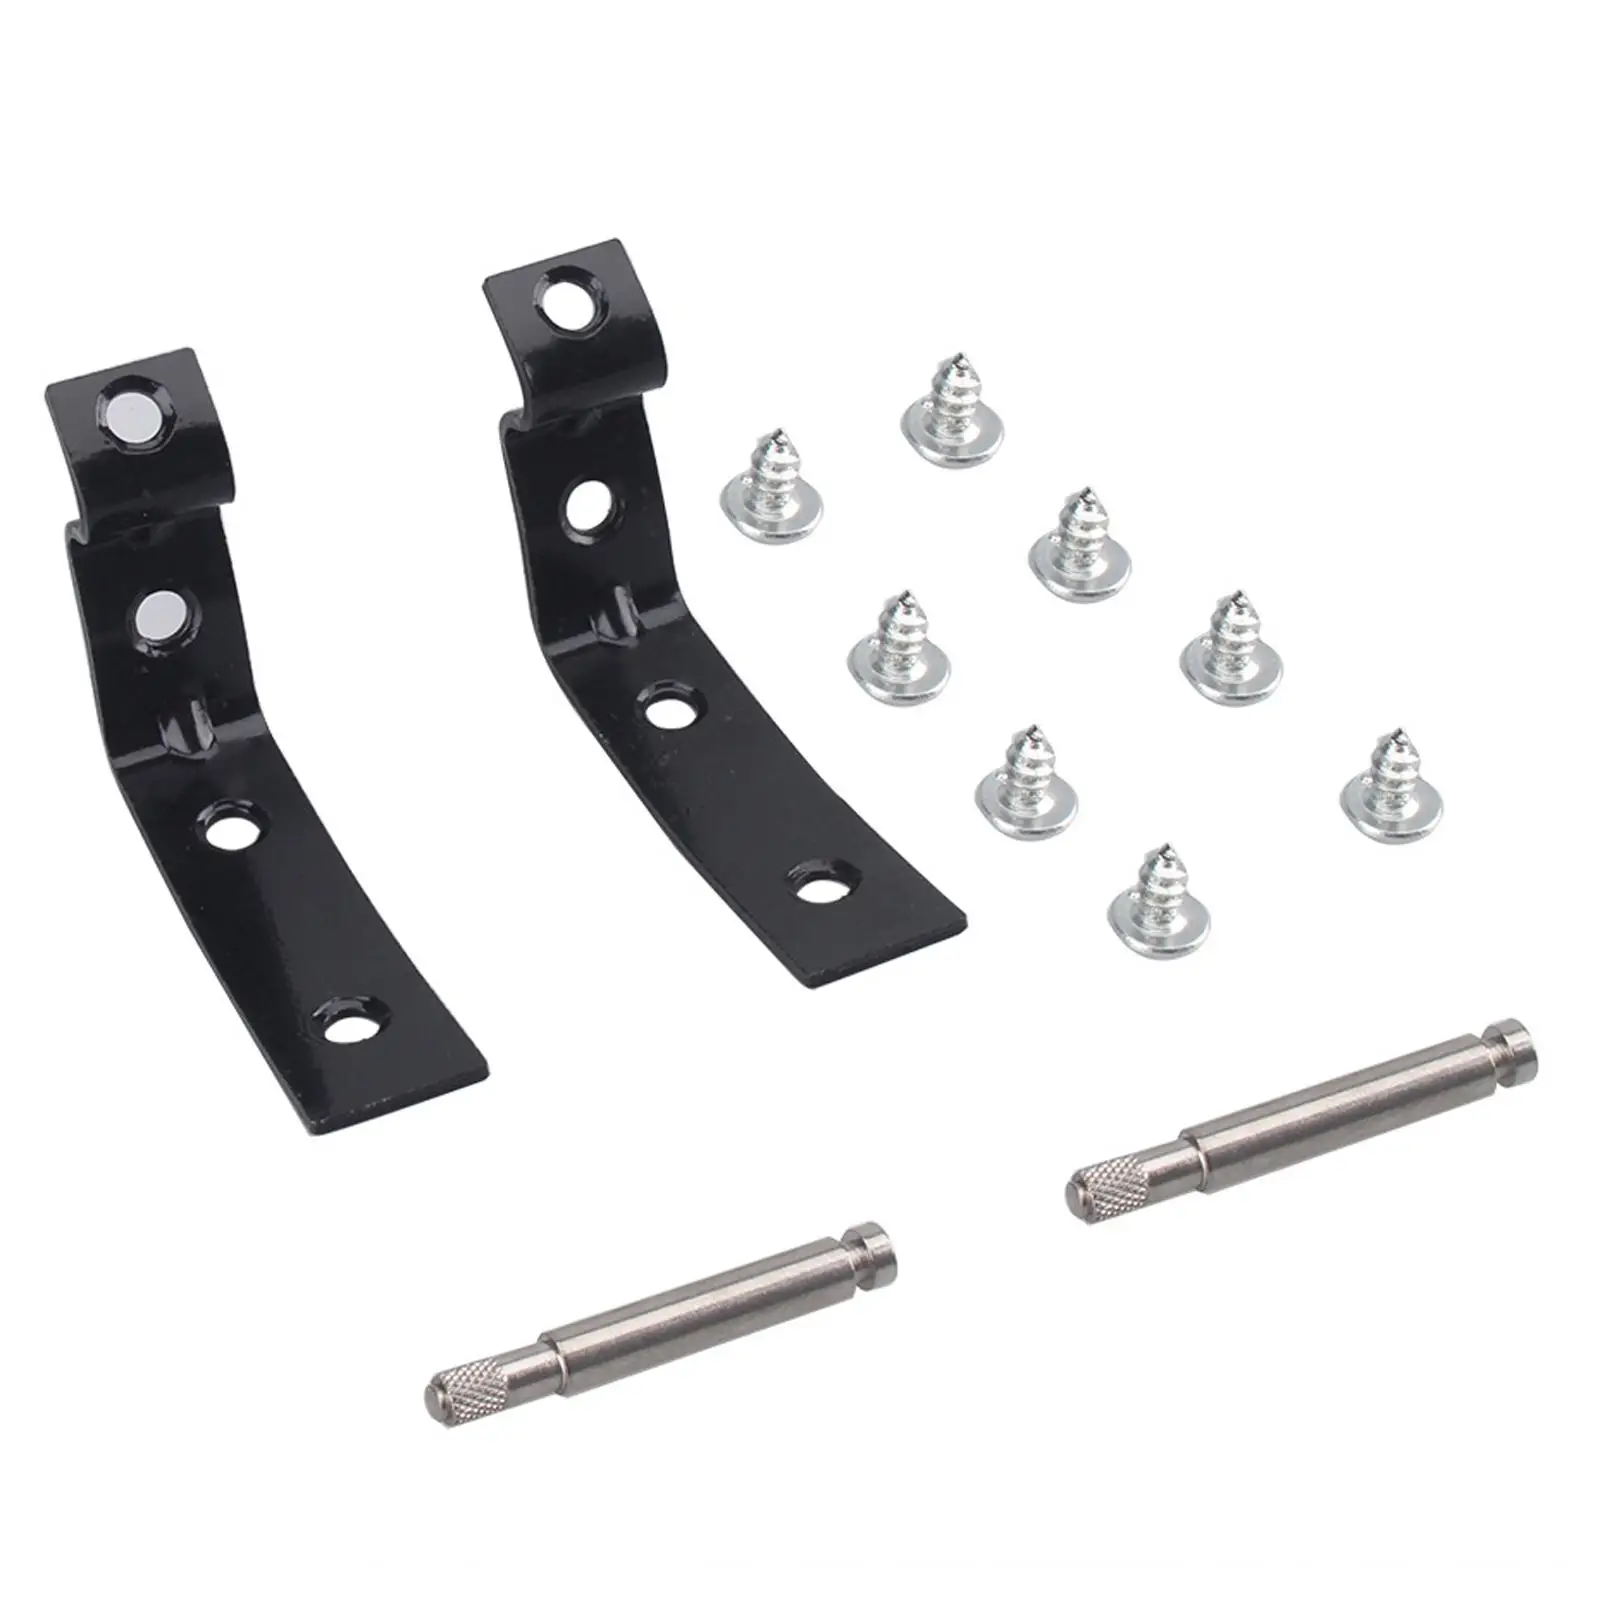 Car Glove Box Hinge Bracket Repair Kit Stainless Steel Mounting Replacement for Audi A4 S4 RS4 B6 B7 8E2857131 8E2857035